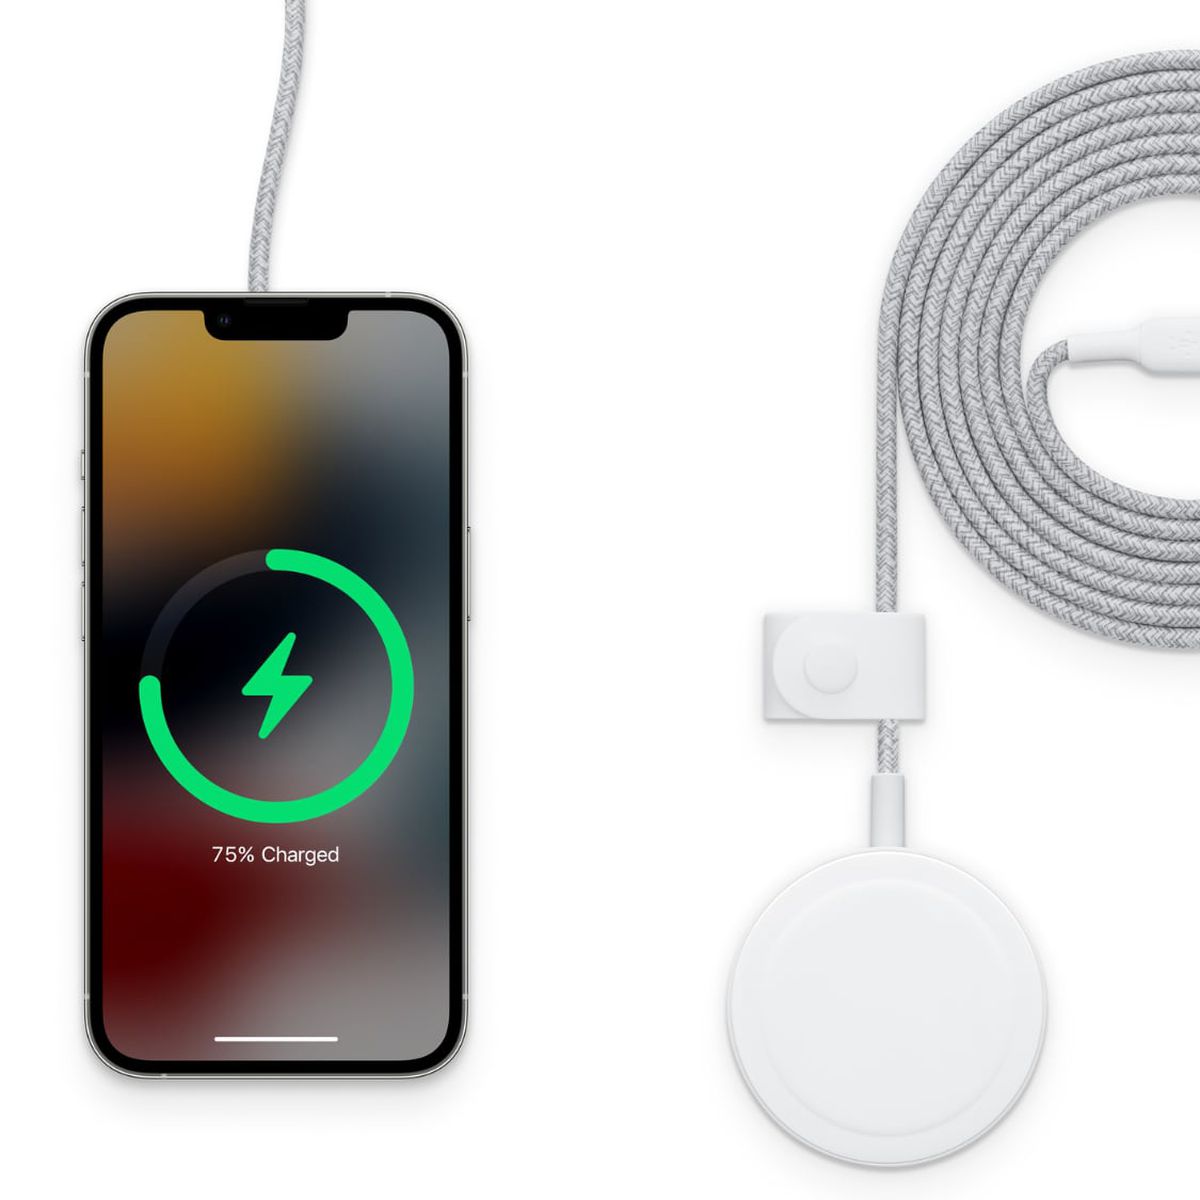 Belkin previews its first MagSafe accessories for the iPhone 12 